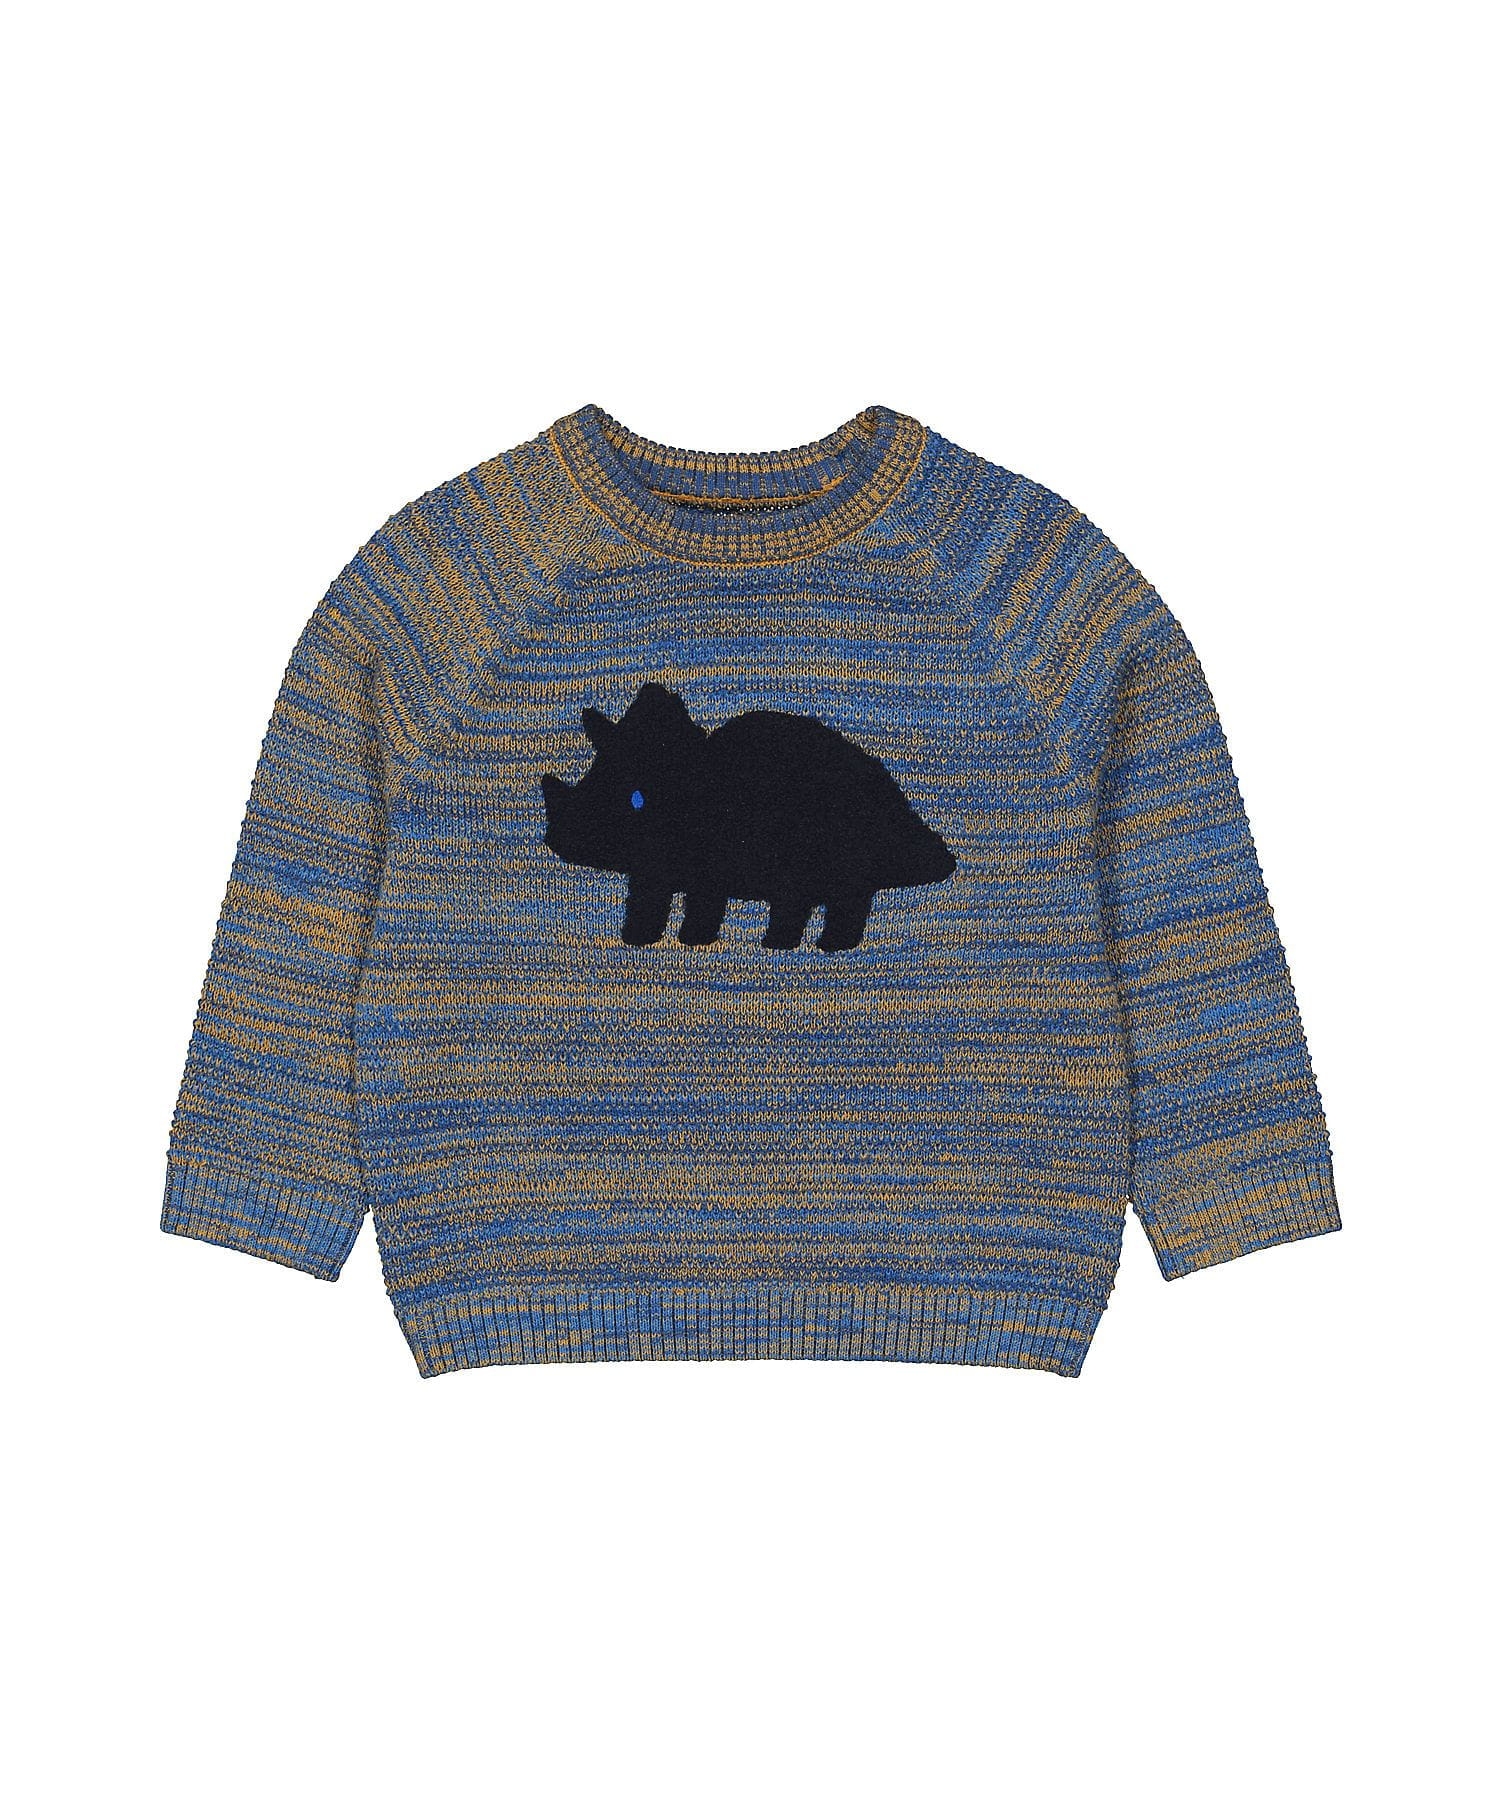 Mothercare | Boys Full Sleeves Sweaters  - Blue 0